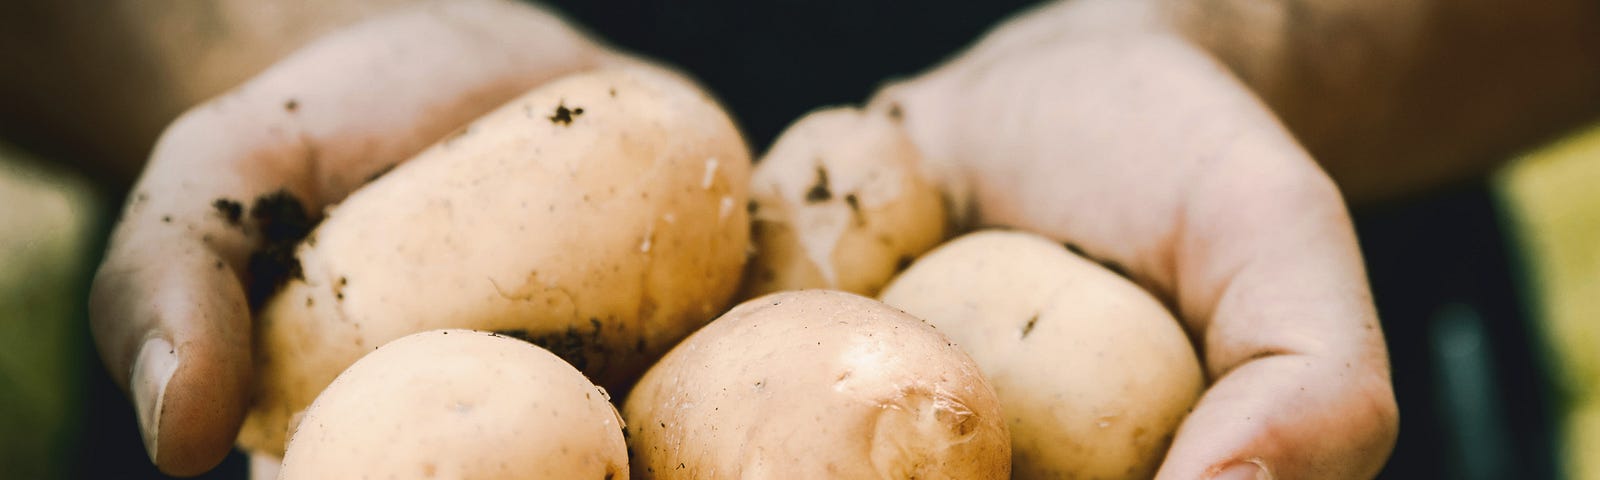 what nutrition is in potatoes